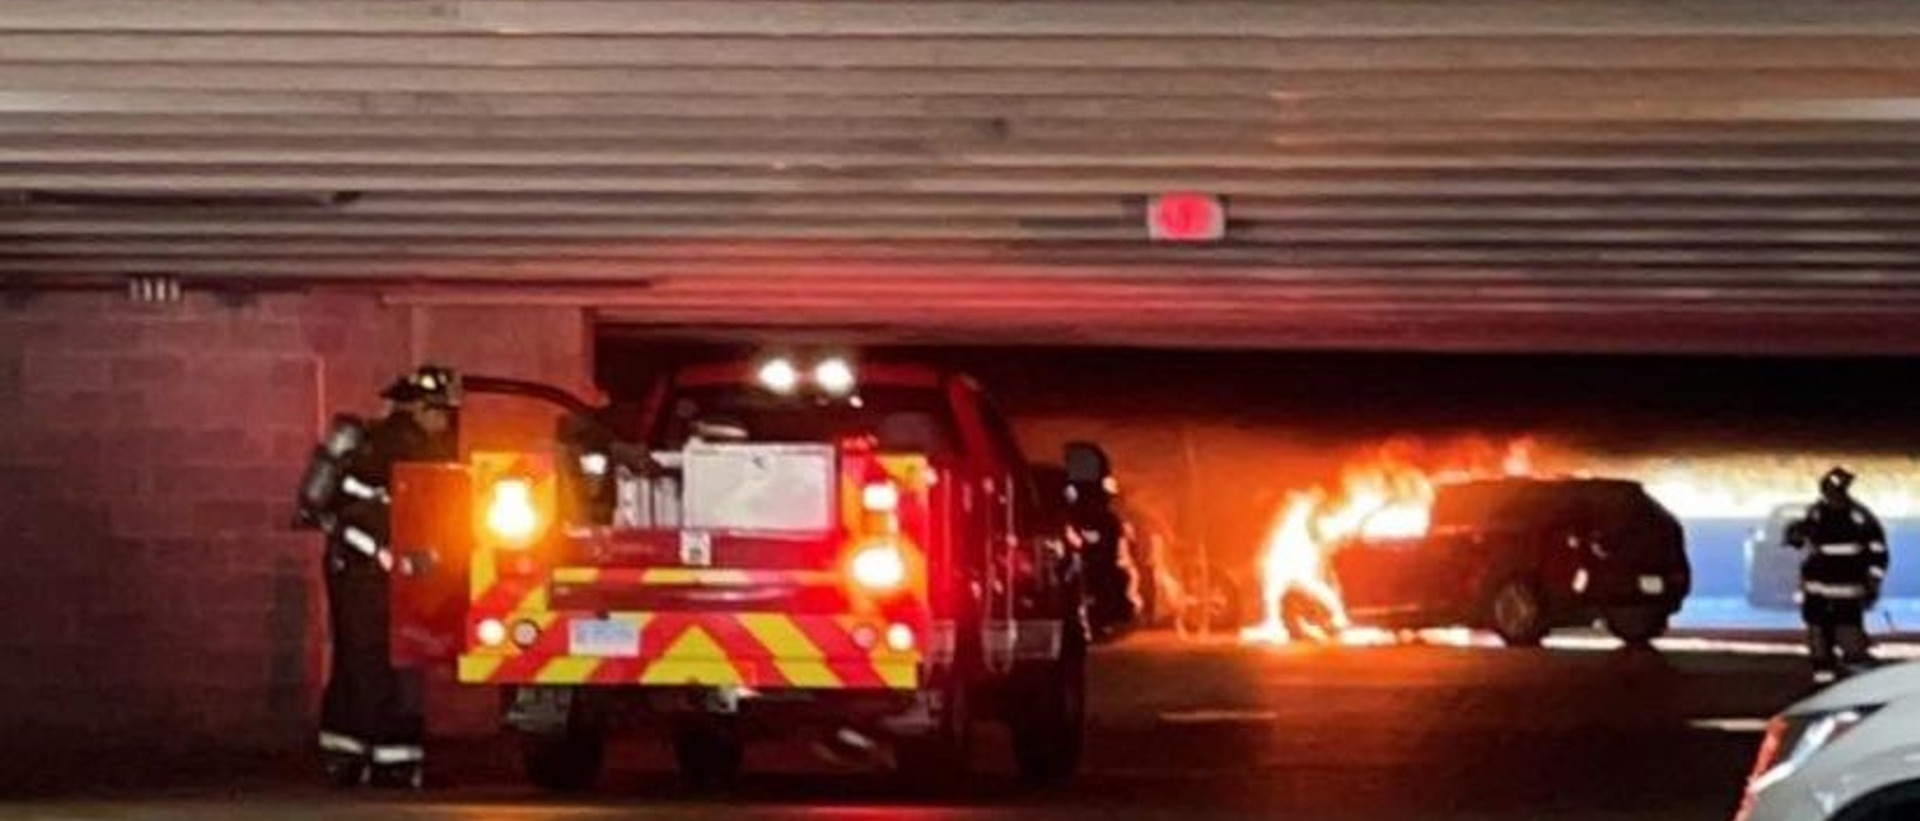 Foxwoods Casino Parking Garage Sees Fire, Multiple Cars in Flames